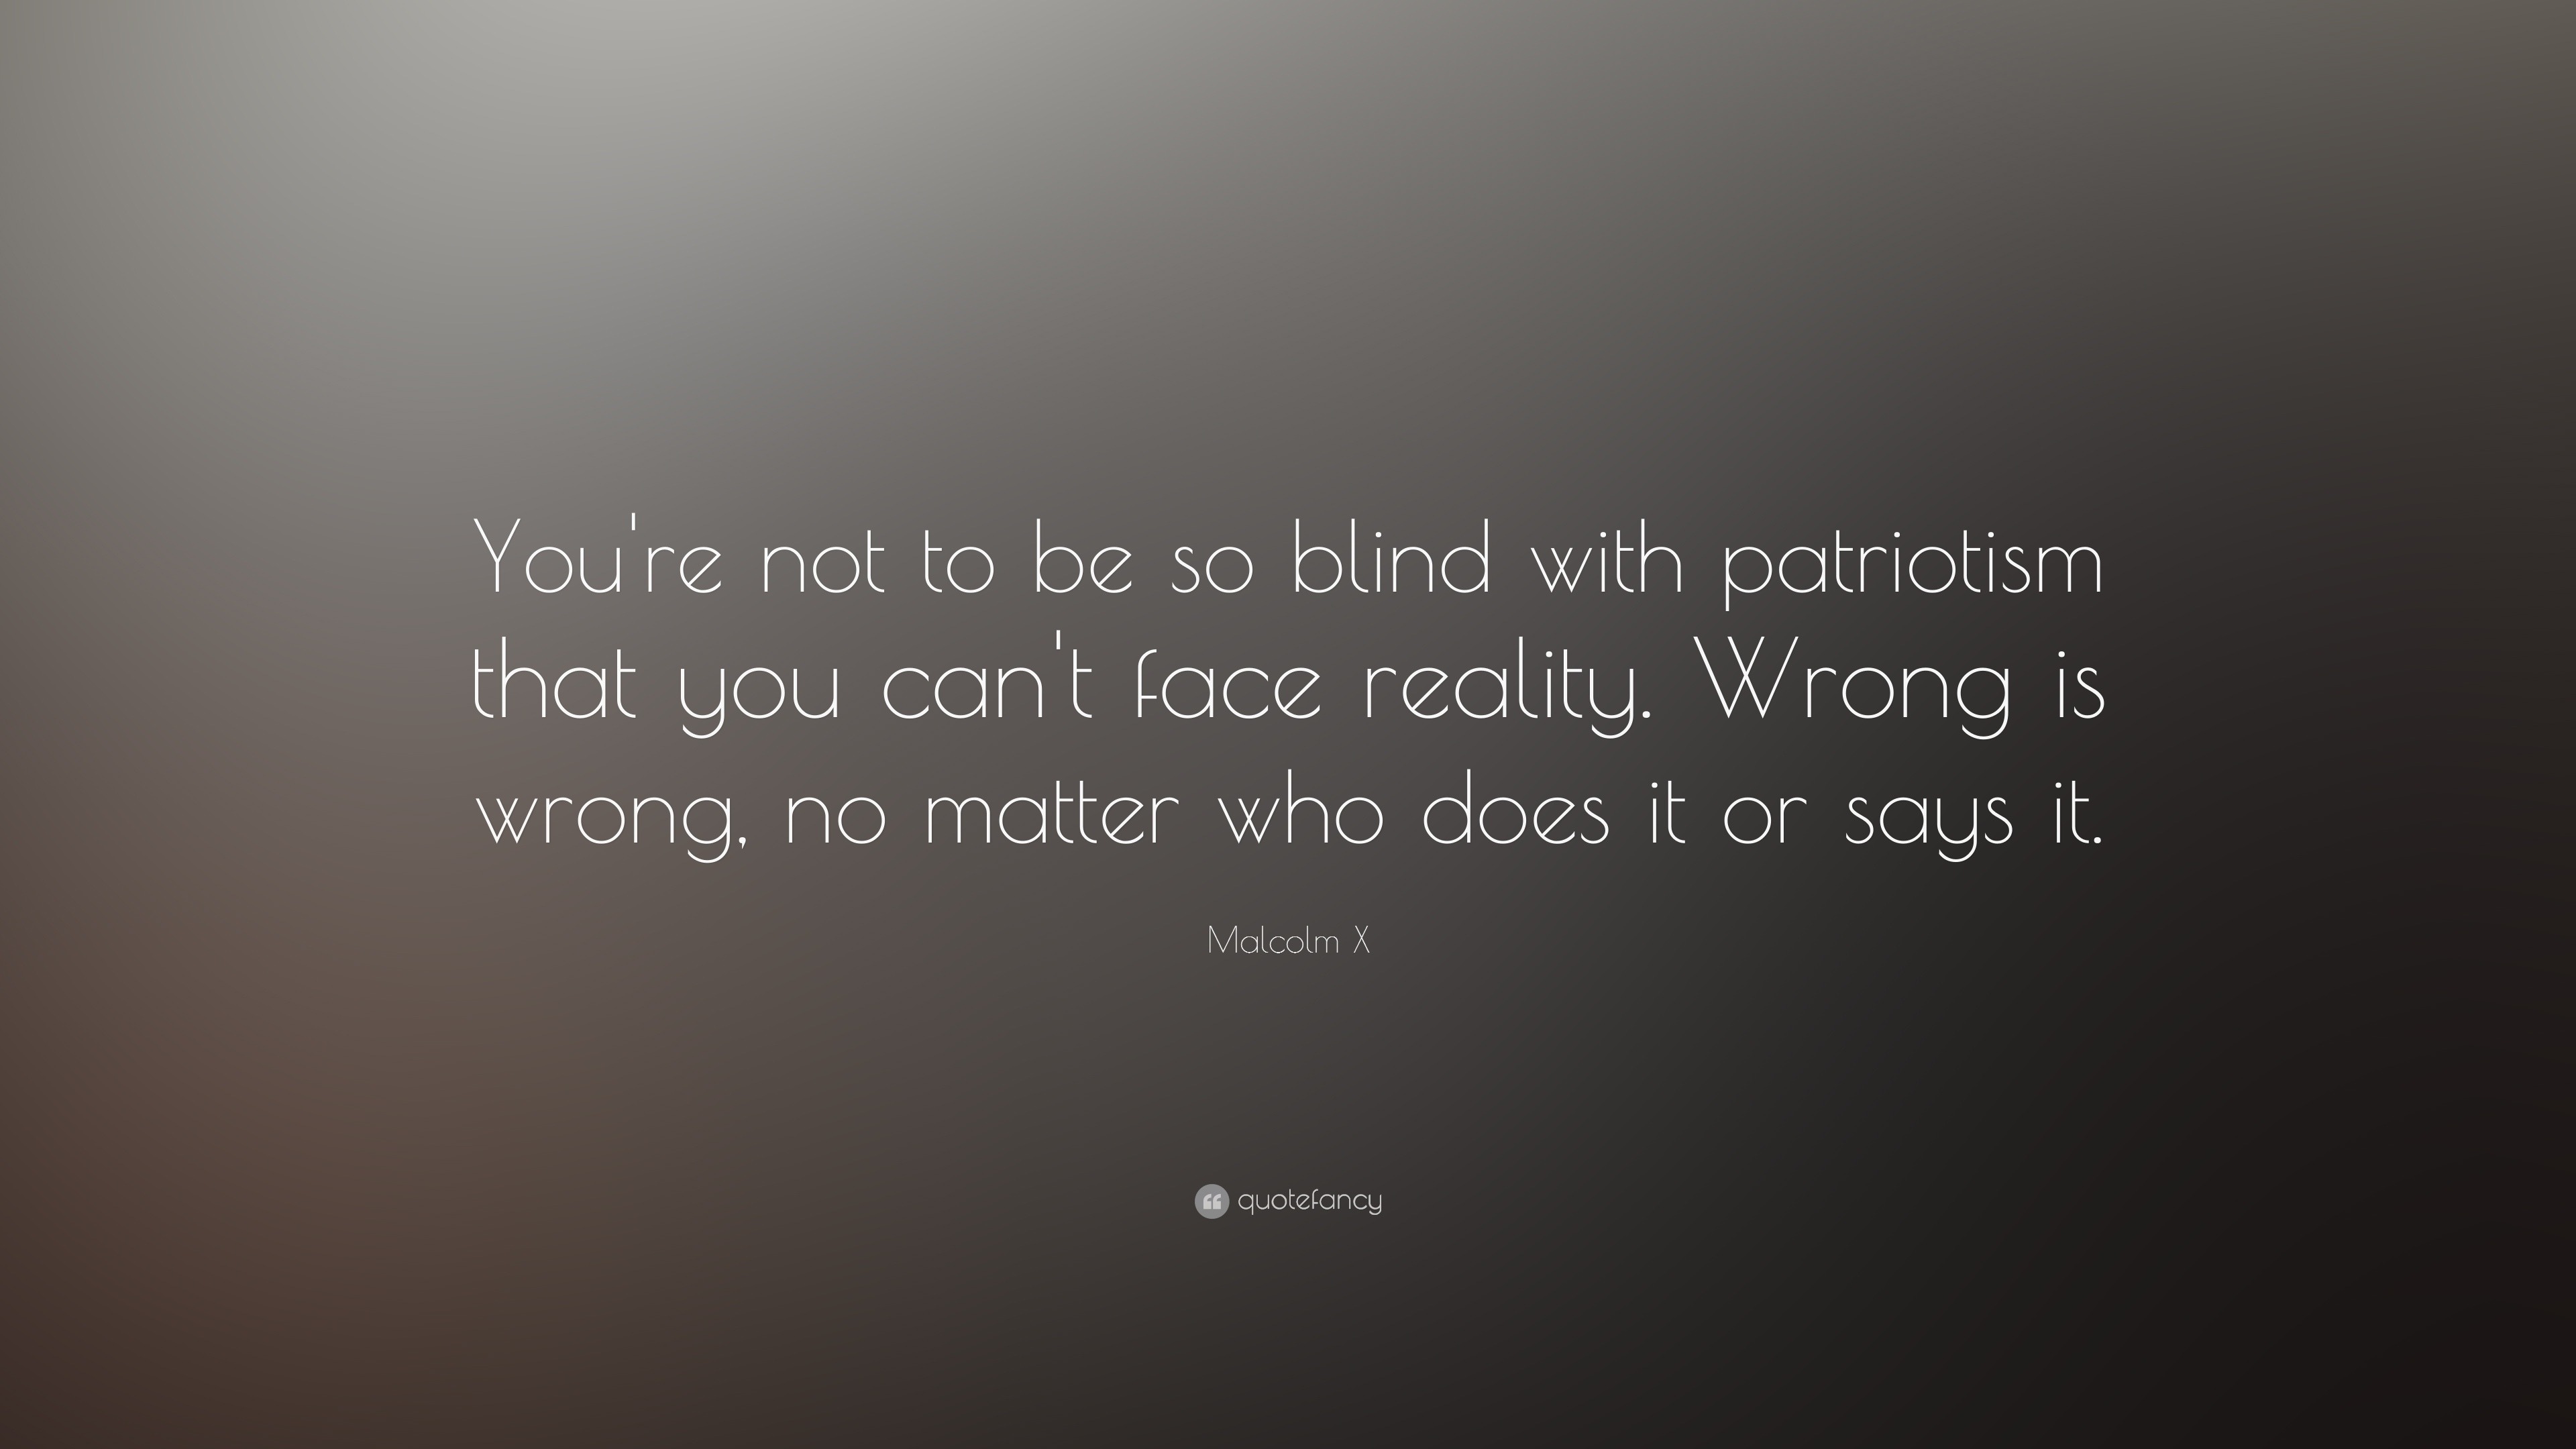 Malcolm X Quote: “You're not to be so blind with patriotism that you ...